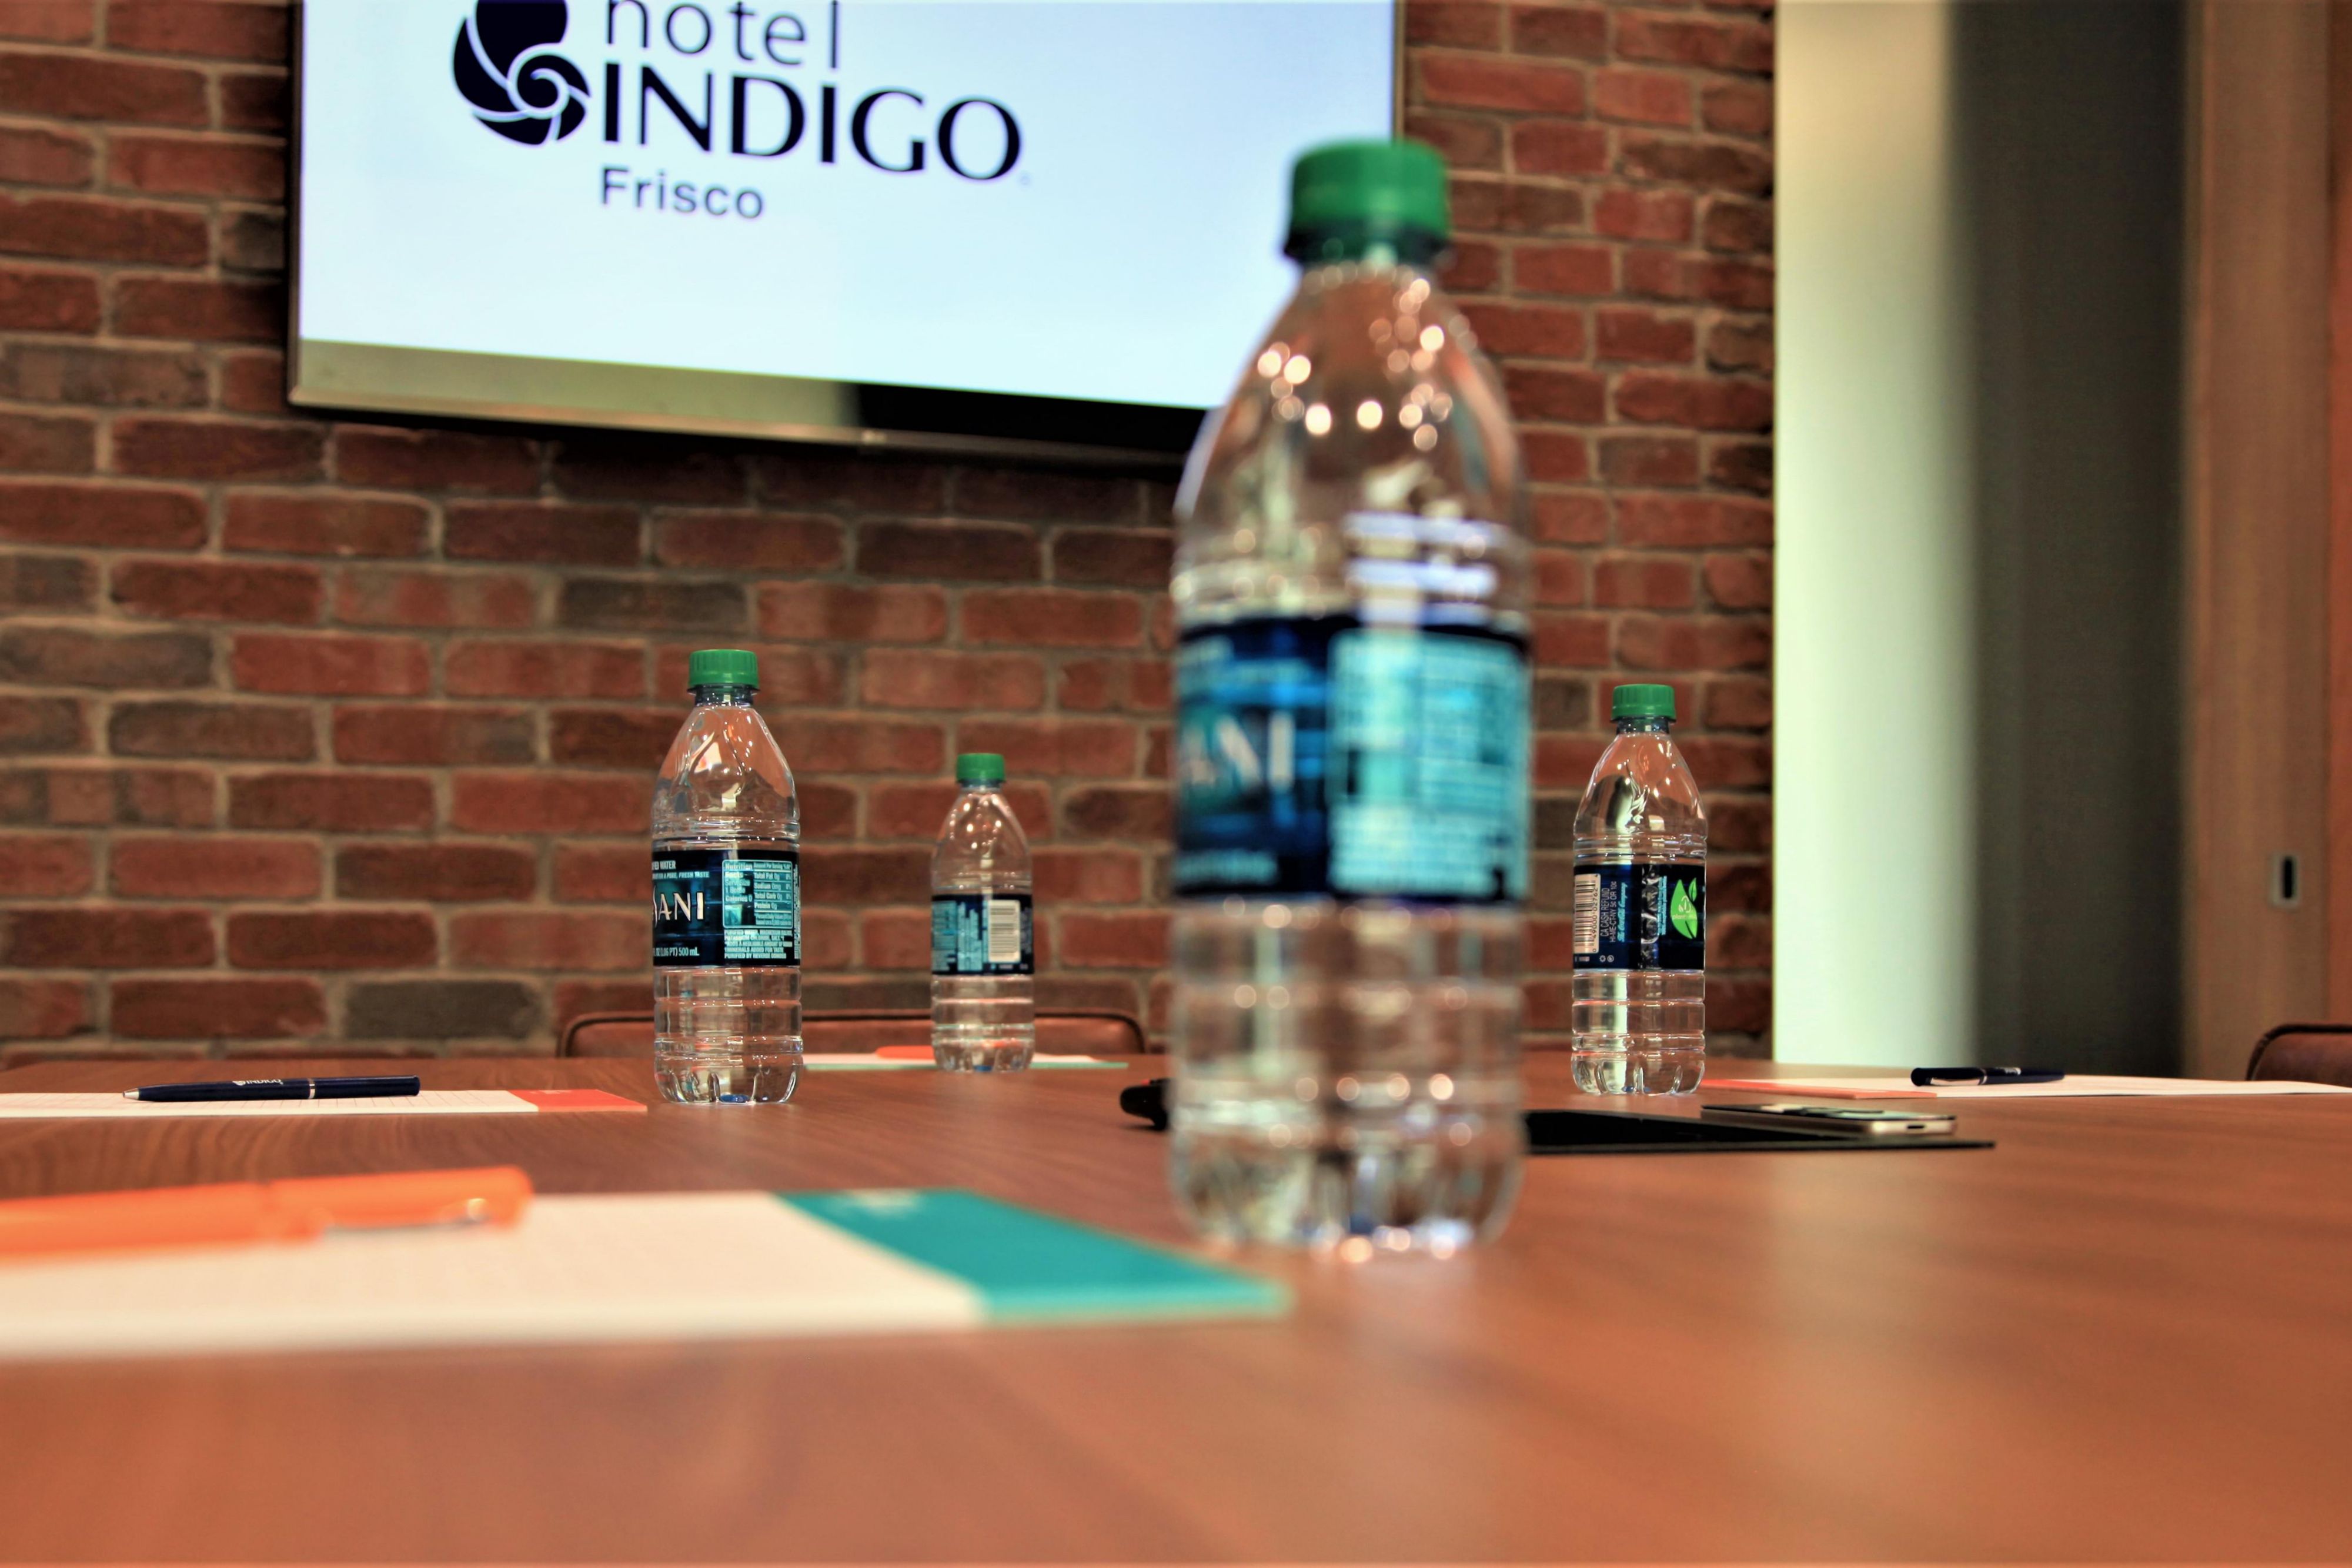 Hotel Indigo Frisco is your destination for meetings and events. Spark creativity and inspire your team in our stylish, high-tech meeting venues in the heart of the city. With over 1,000 sq. ft. of event space, 110 guestrooms and suites, and onsite restaurant & bar. Our dedicated professionals will ensure your meeting and event stands out.